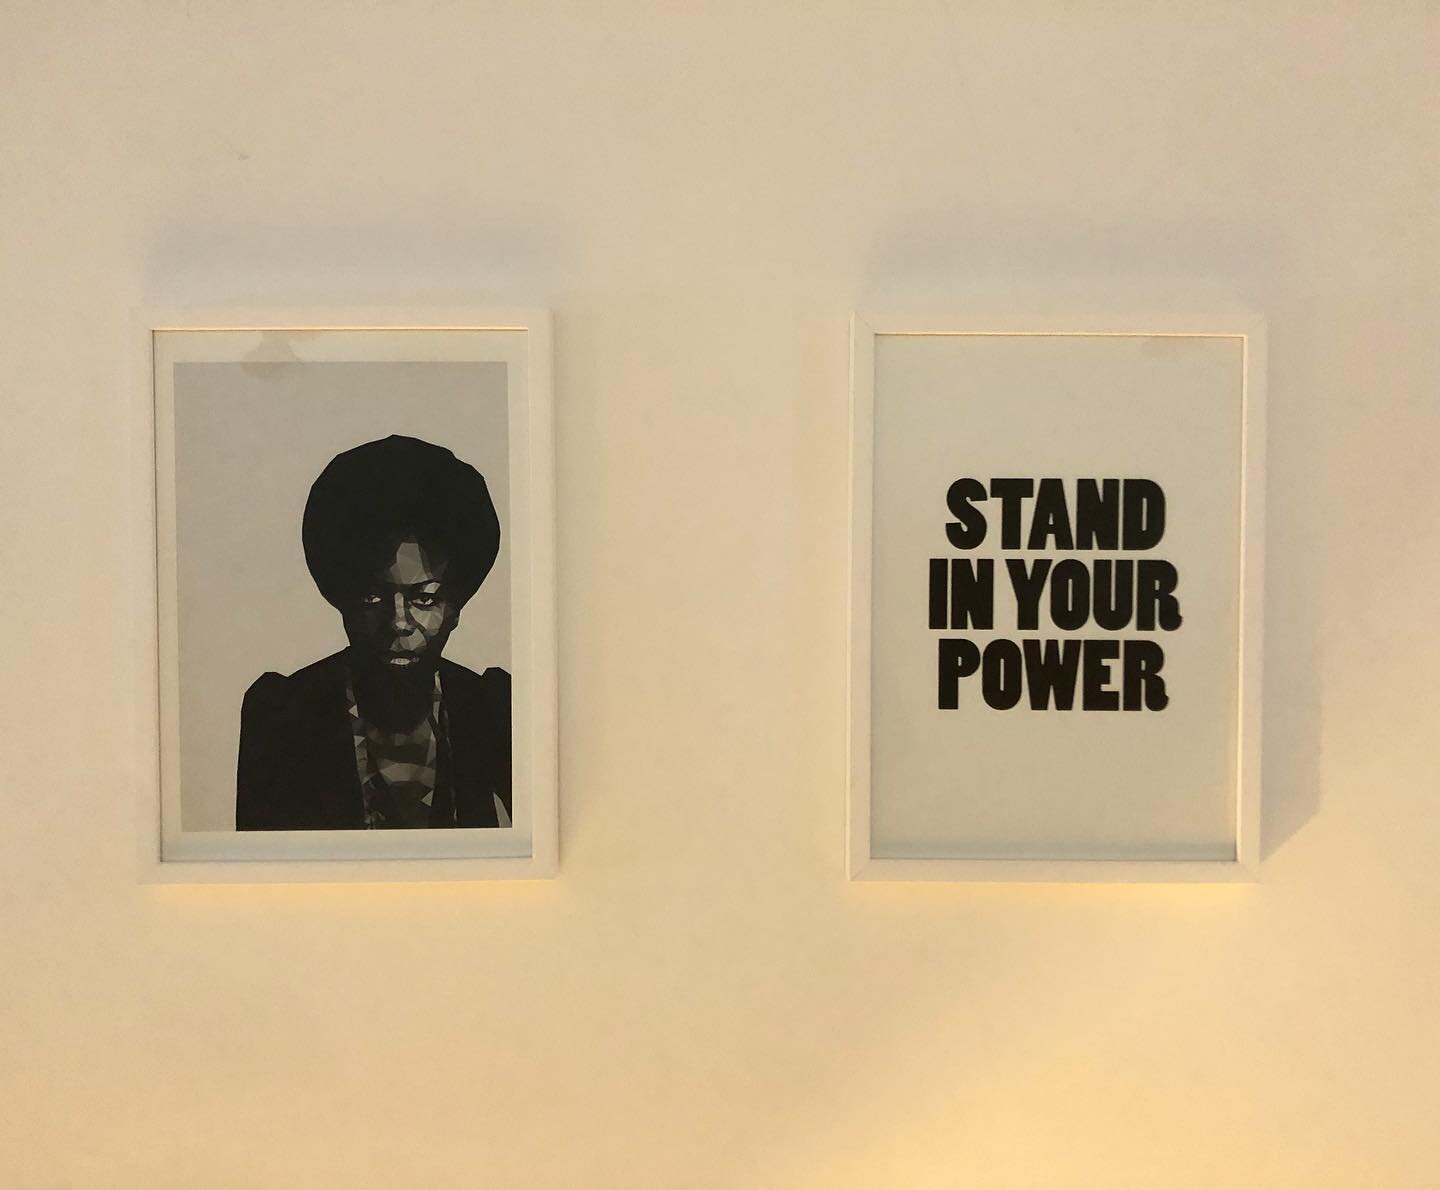 STAND IN YOUR POWER ✨
.
I don&rsquo;t always know what that means.
Still, I wanted it to be a reminder when I leave and return home, so now it&rsquo;s hanging in my hallway.
.
I think for now, for me, standing in my power means standing in my truth, 